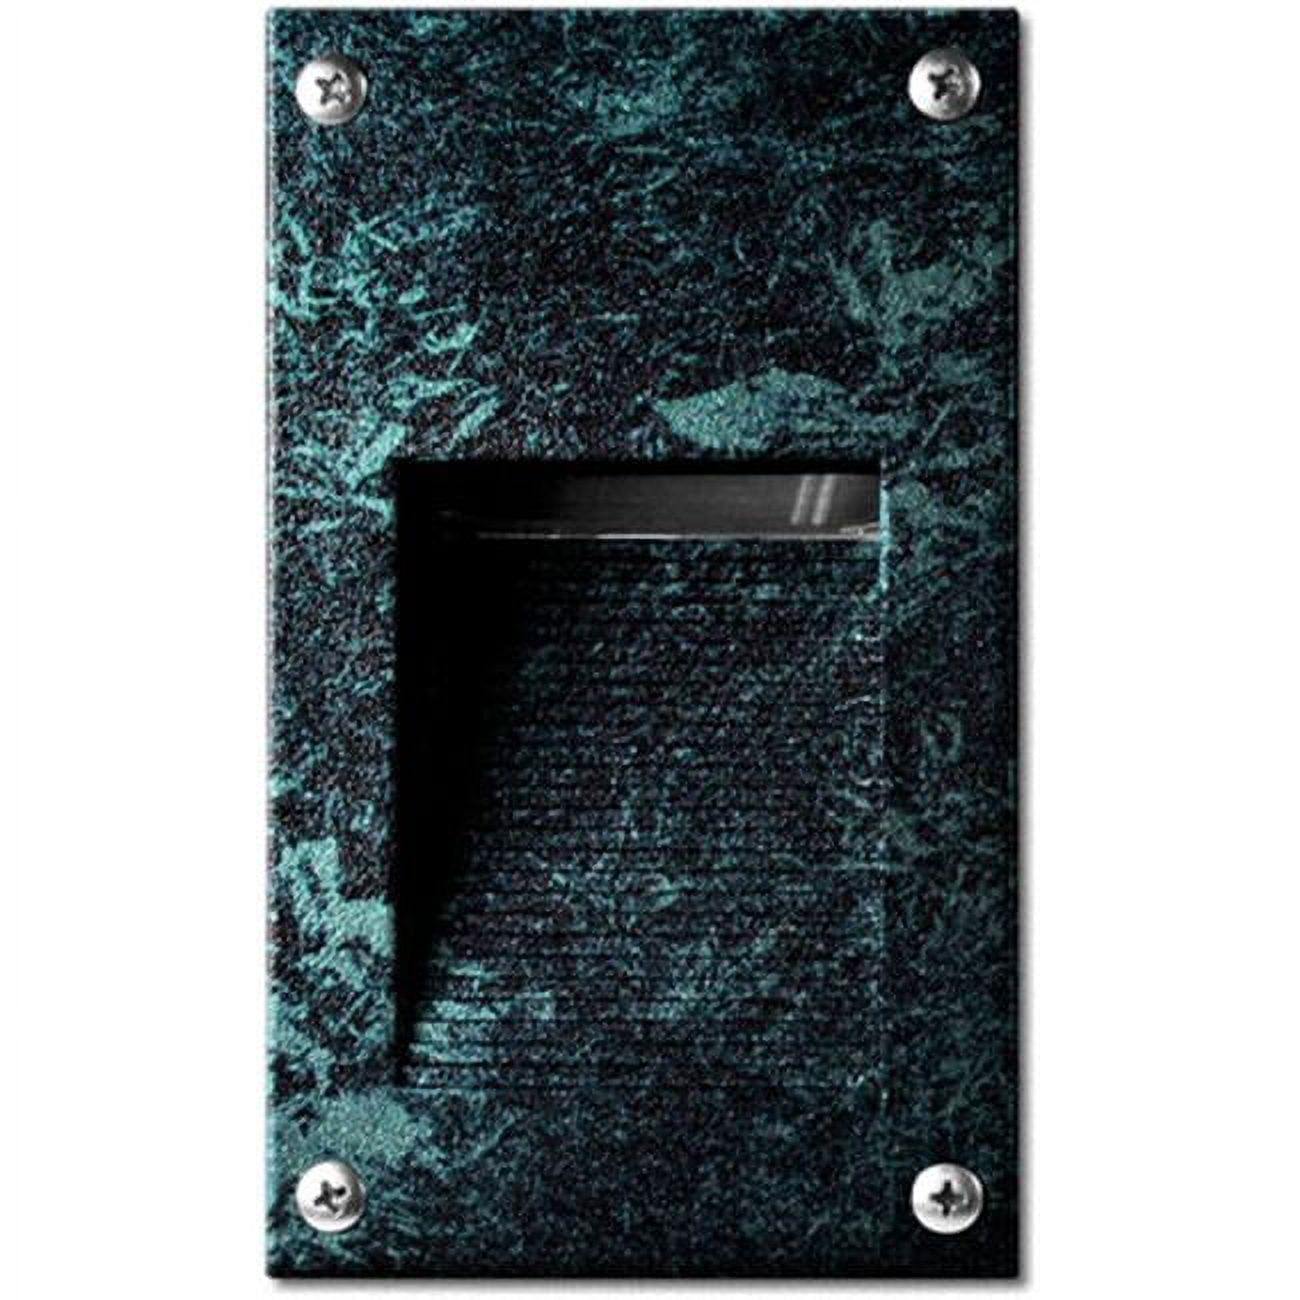 Picture of Dabmar Lighting LV670-VG Cast Aluminum Recessed Hooded Brick, Step & Wall Light, Verde Green - 6.44 x 3.88 x 2.56 in.